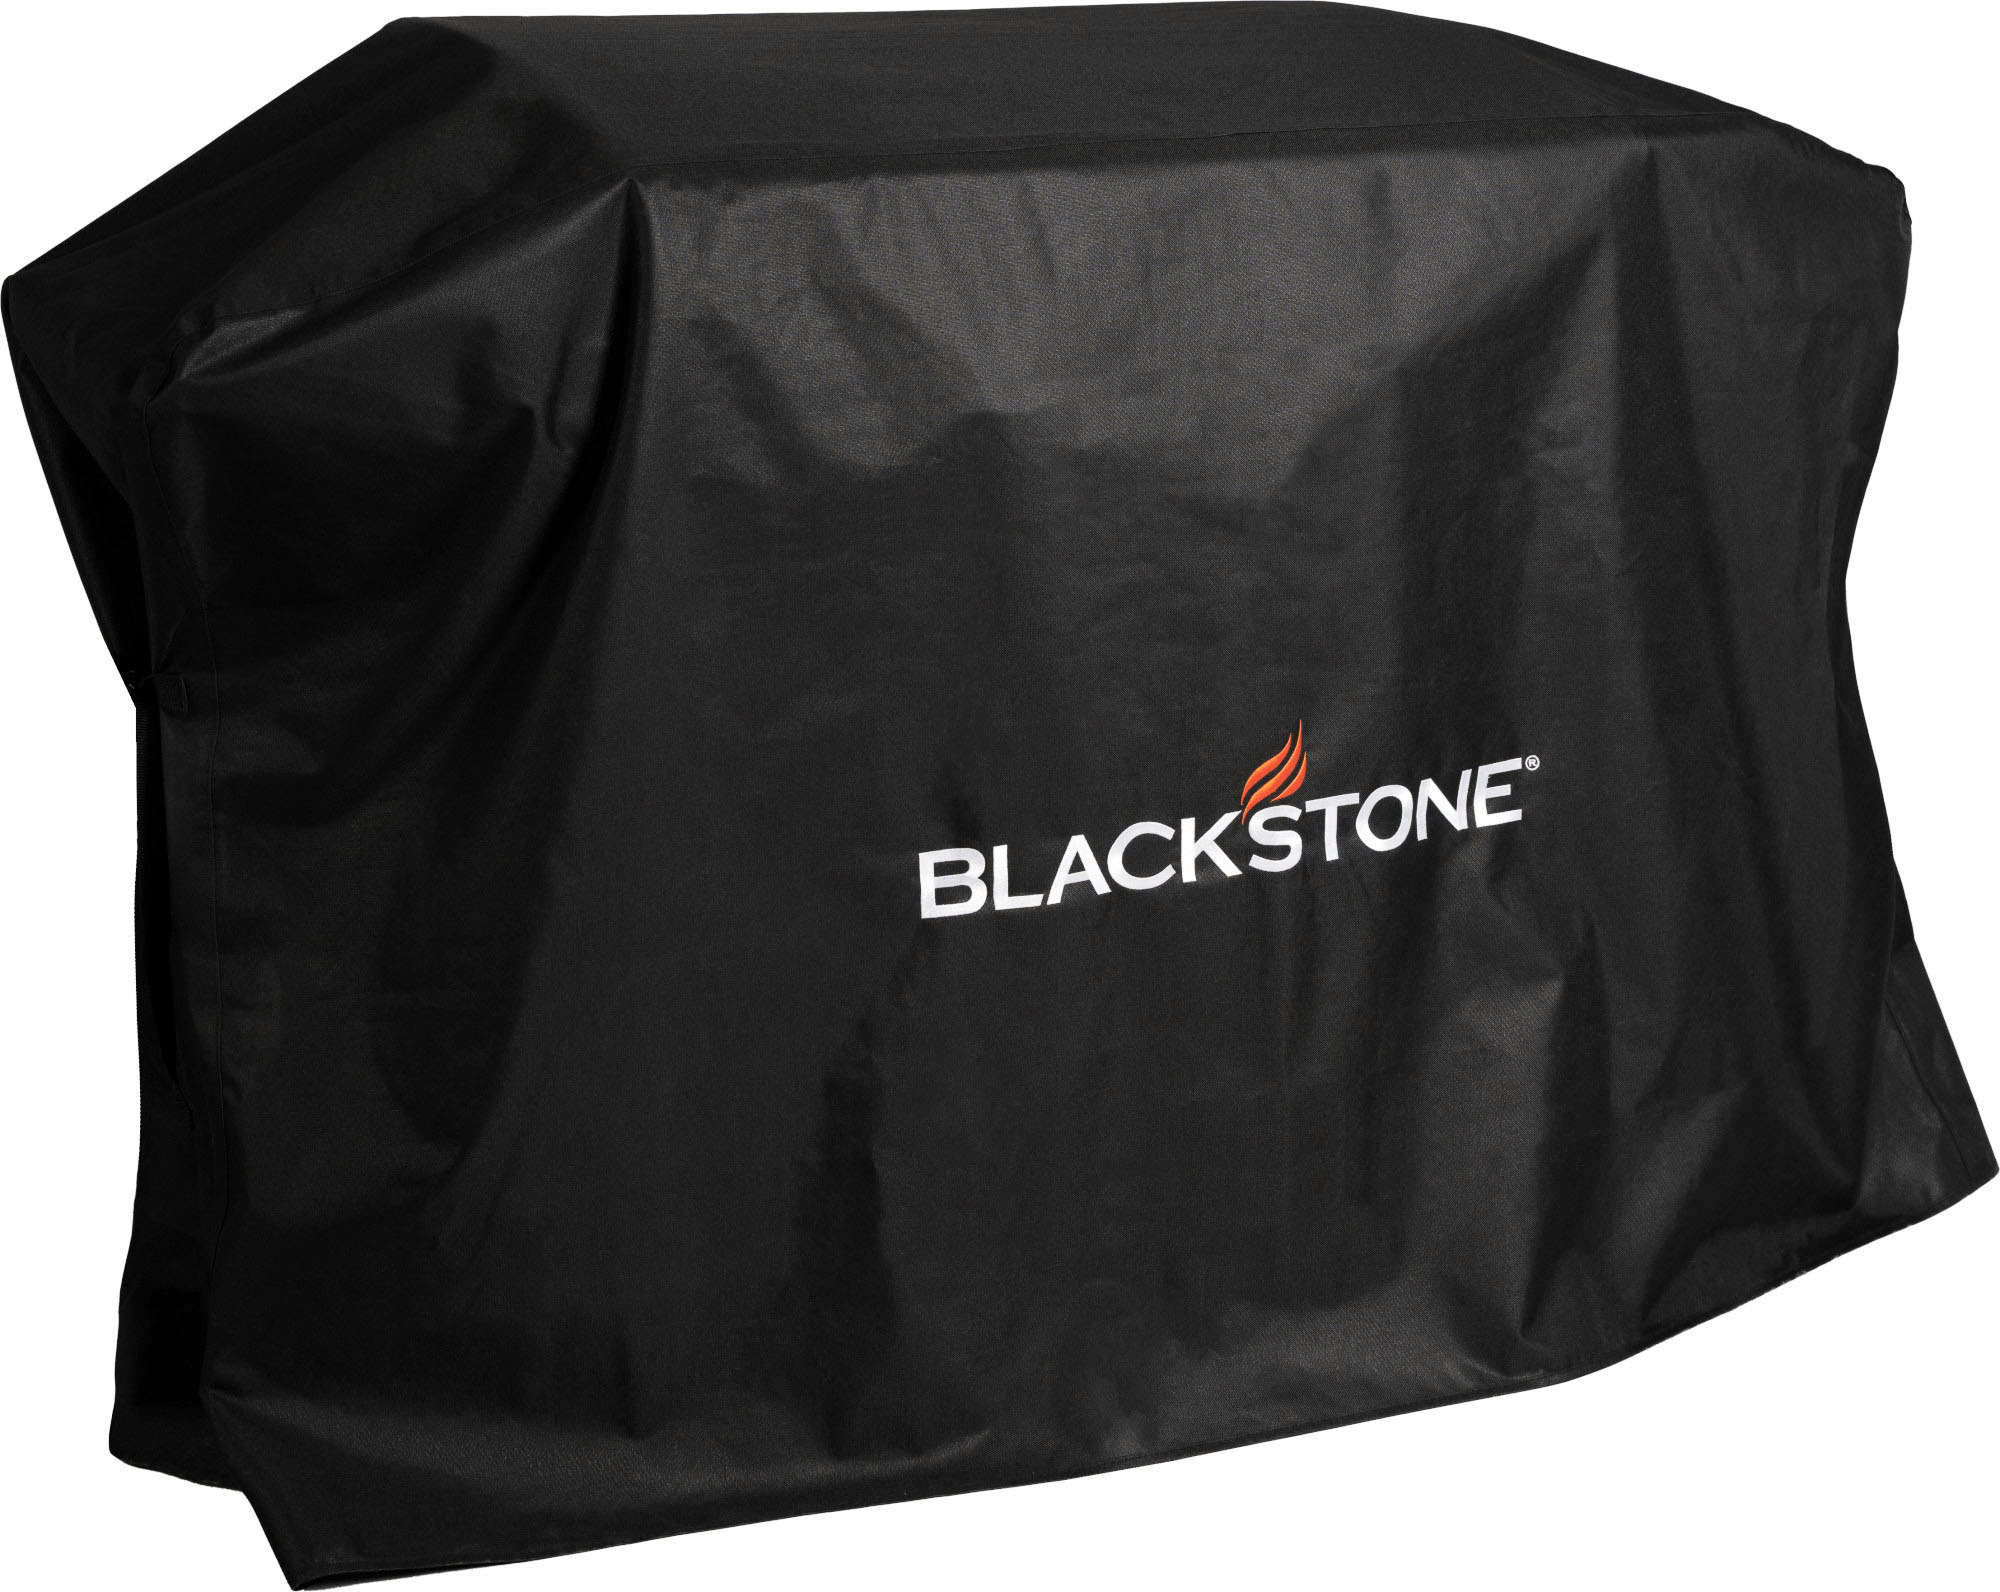 Angle View: Blackstone - 28 In. Outdoor Griddle Cover with Adjustable Straps - Black